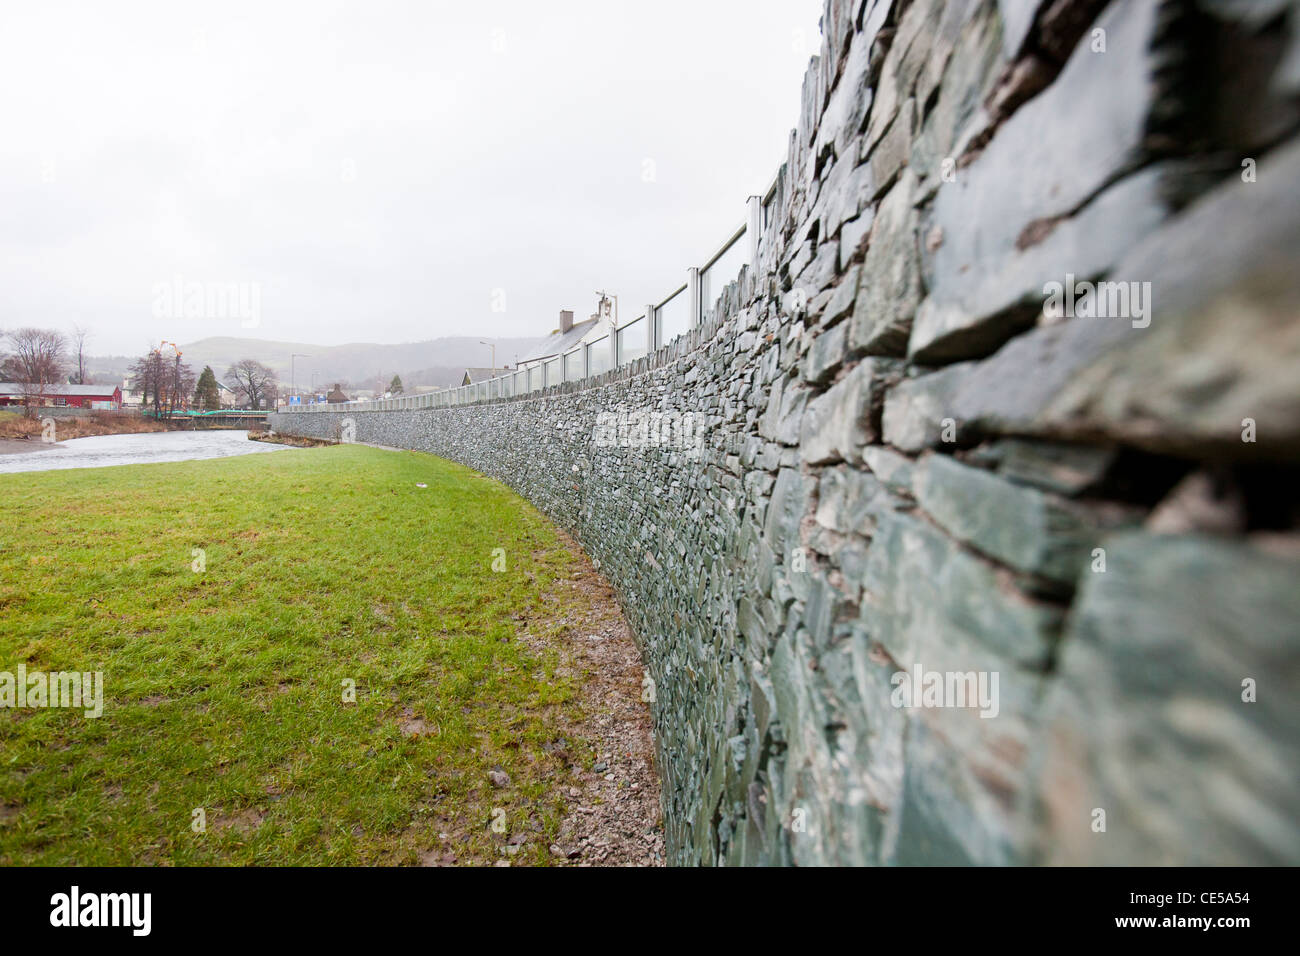 New flood defences being built in Keswick after the disastrous 2009 floods, Lake district, UK. Stock Photo